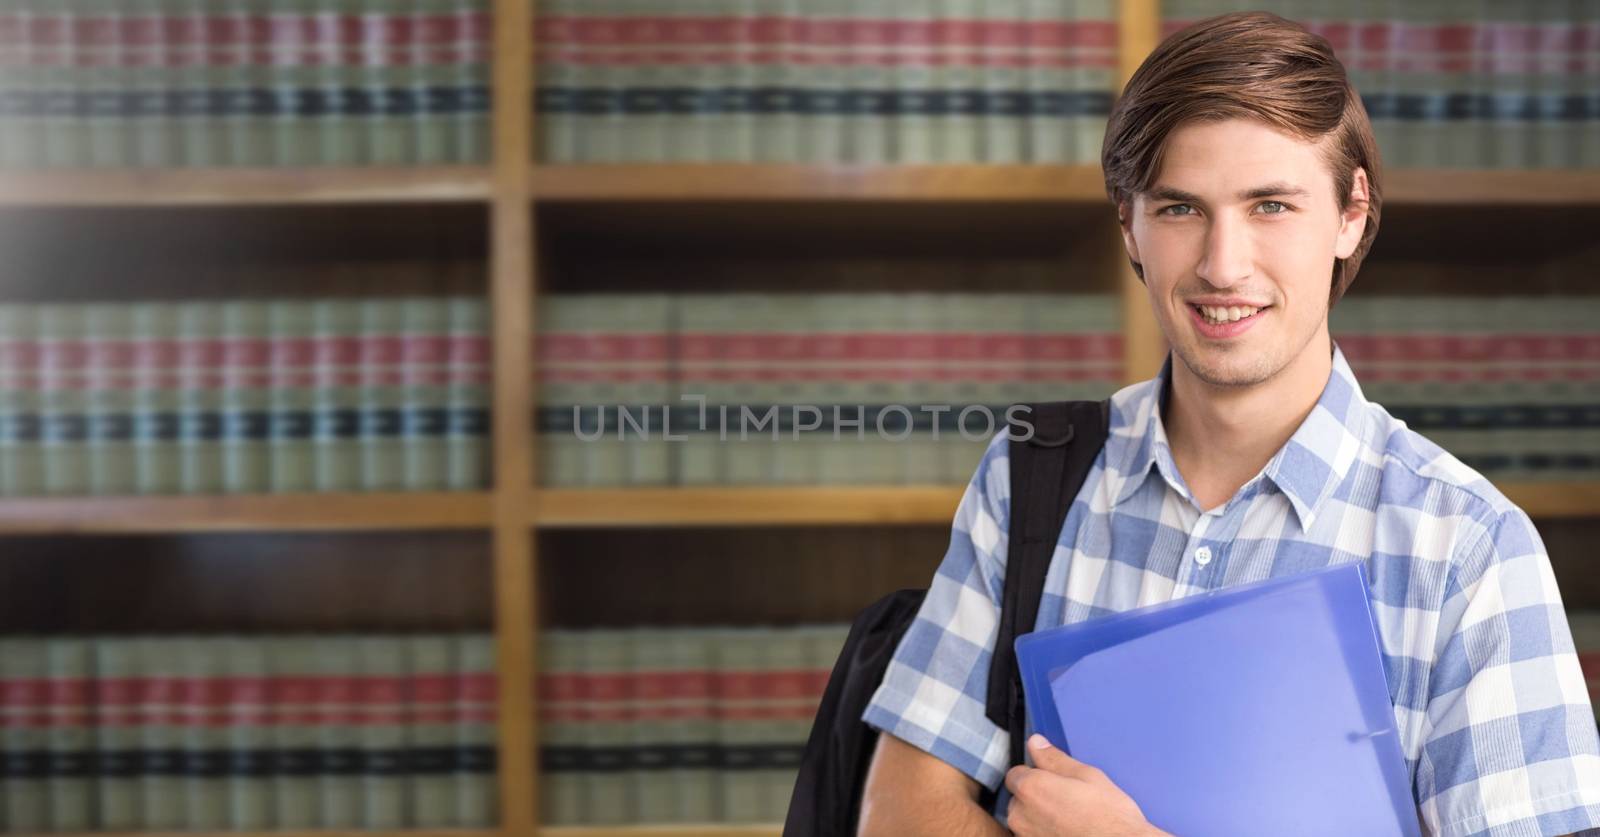 Student man in education library by Wavebreakmedia